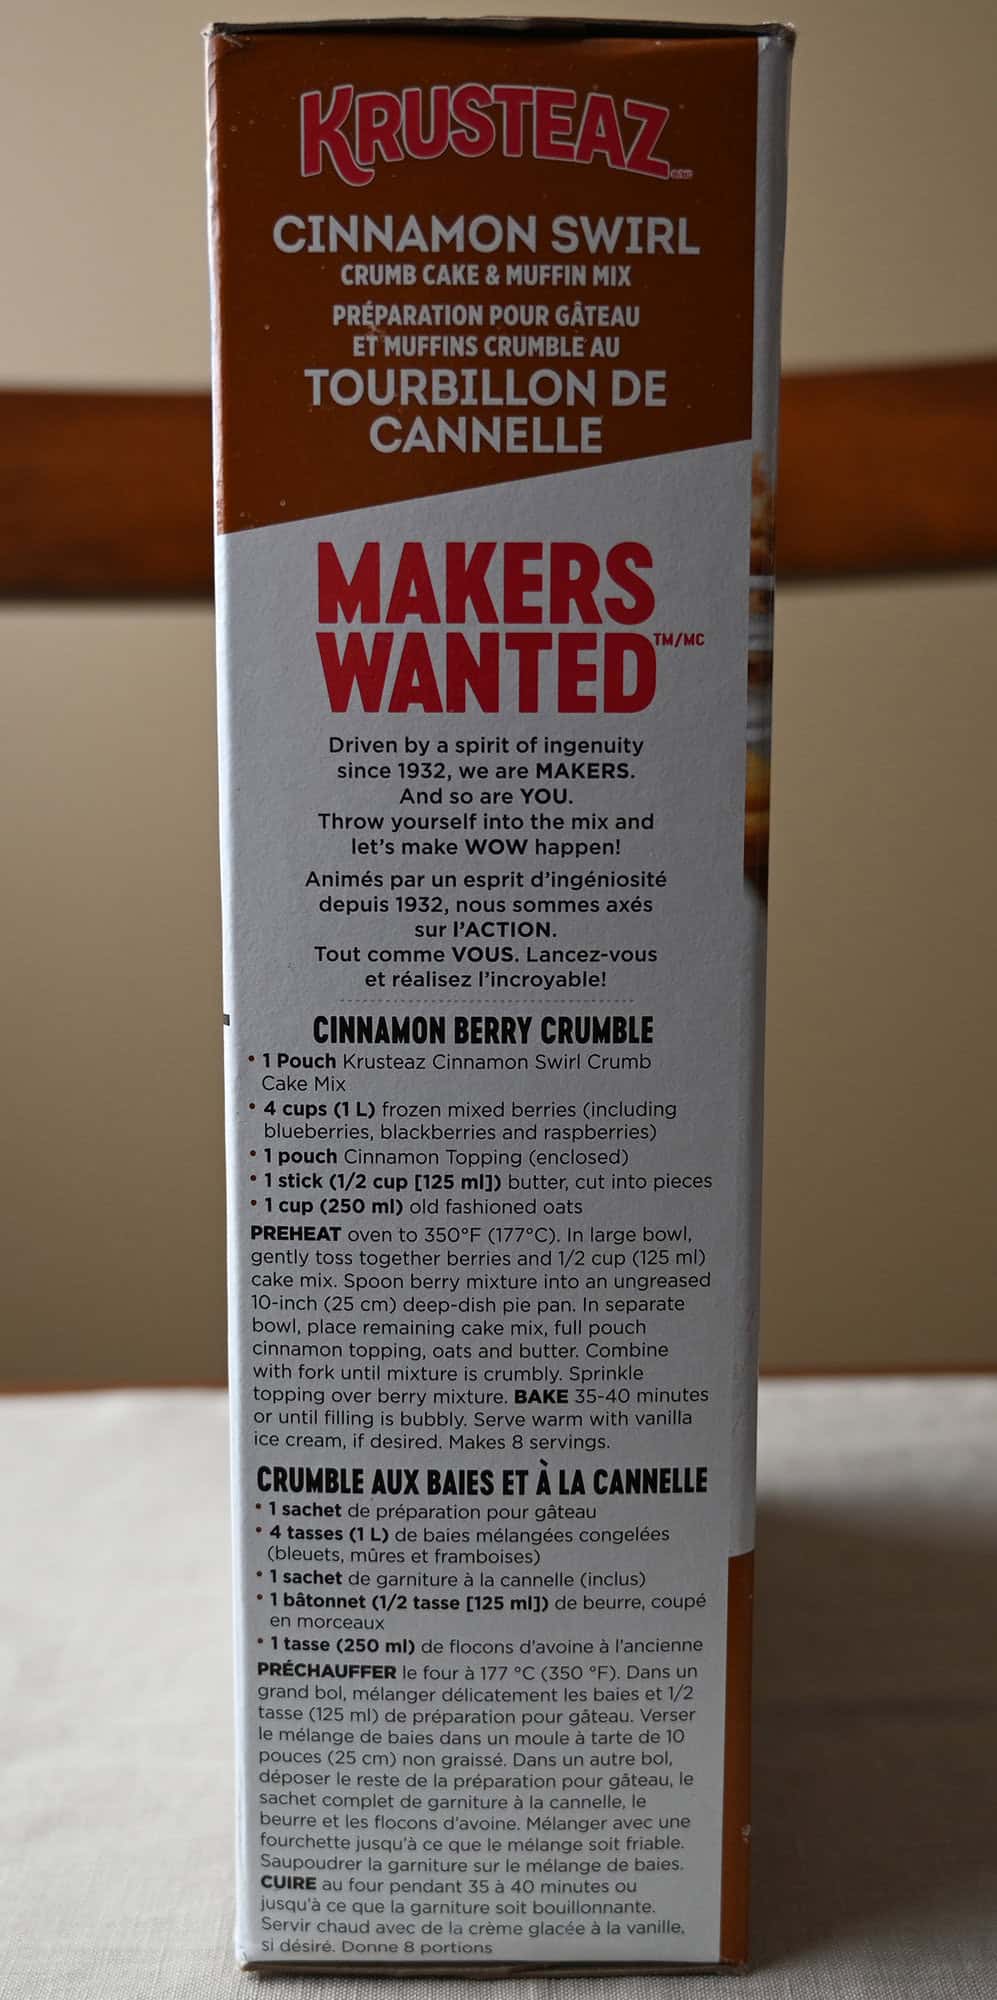 Image of the side of the box of mix showing a recipe for a cinnamon berry crumble.